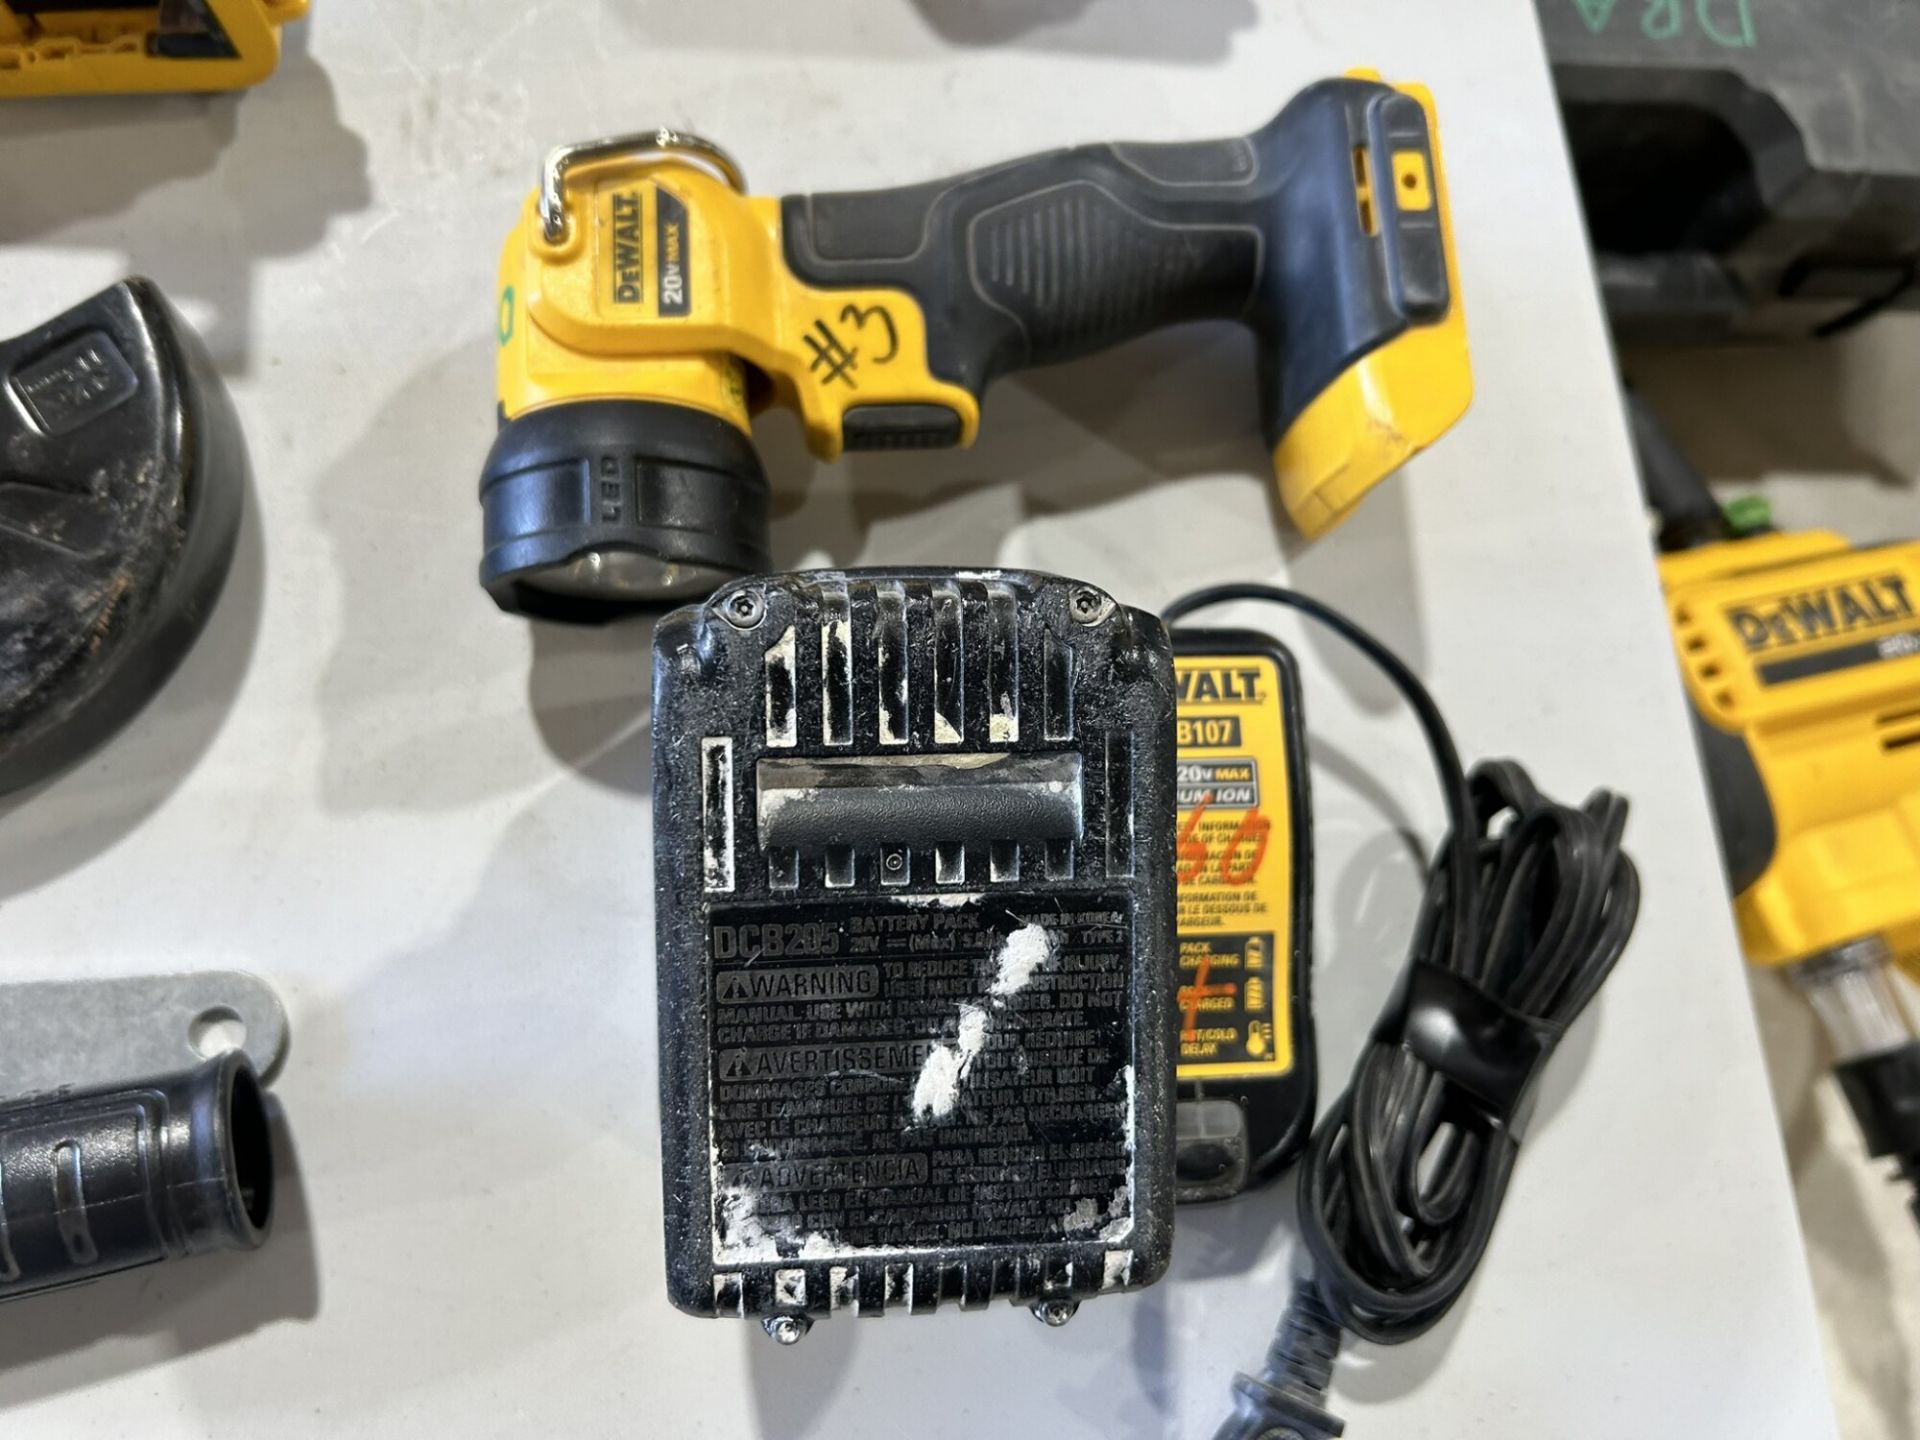 DEWALT CORDLESS RIGHT ANGLE DRILL , RECIPROCATING SAW, ANGLE GRINDER, IMPACT DRIVER, & LIGHT W/ - Image 4 of 11